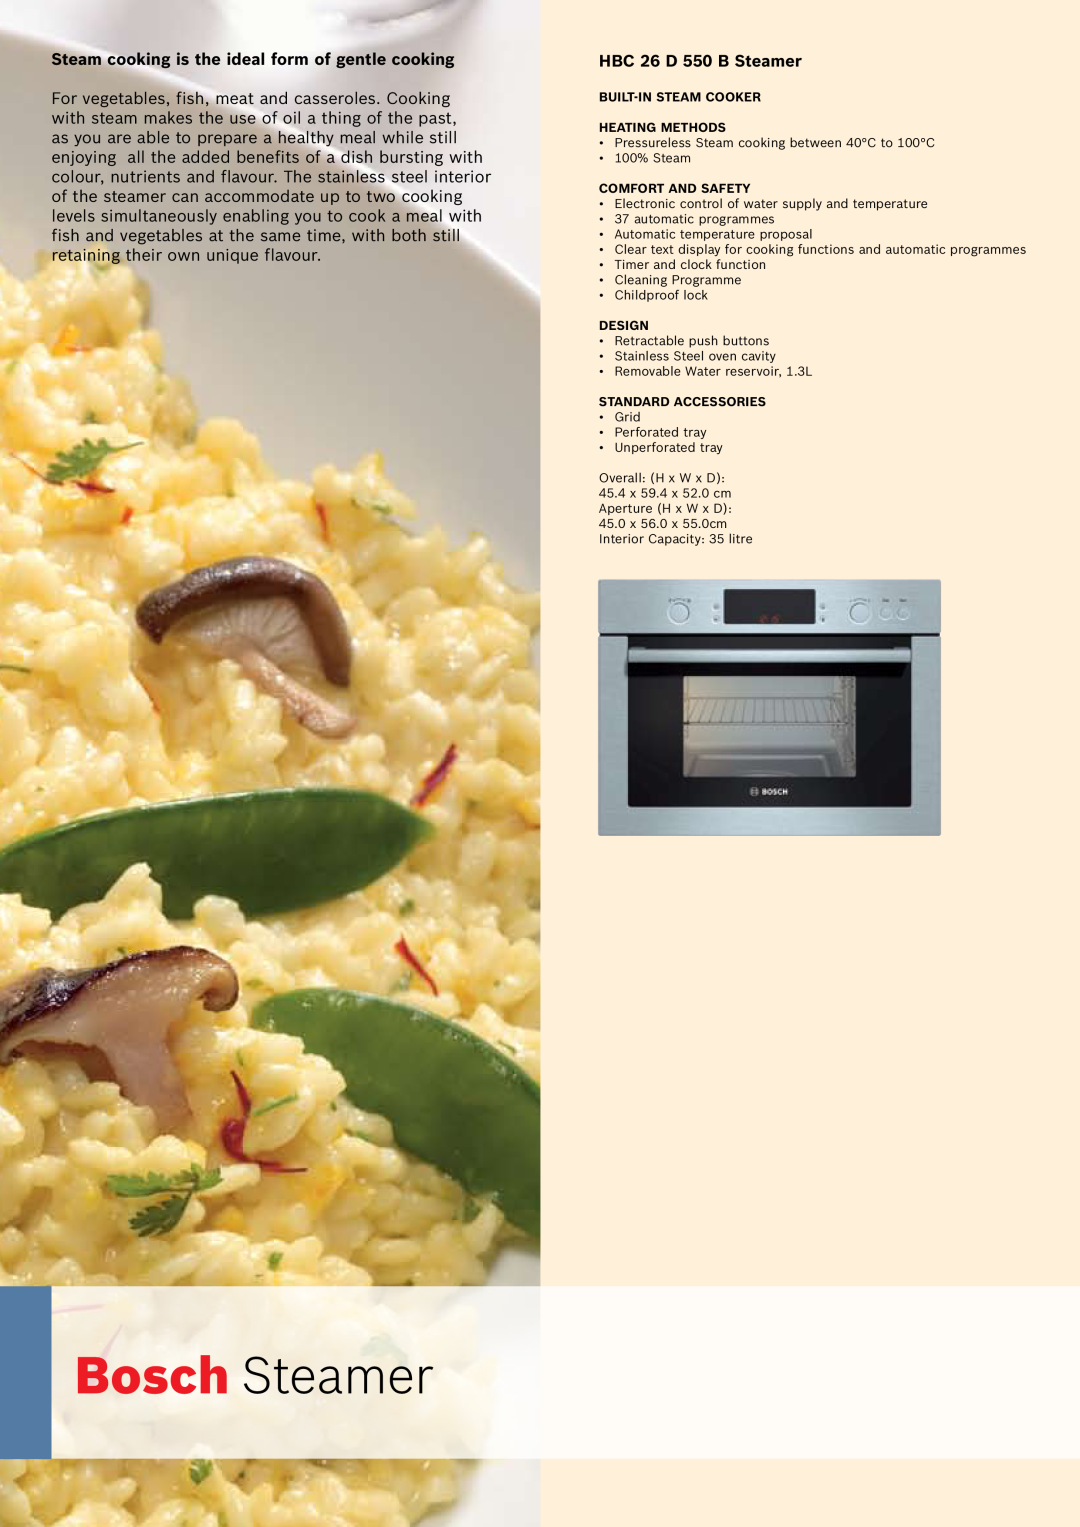 Bosch Appliances Oven Carriage Bosch Steamer, Steam cooking is the ideal form of gentle cooking, HBC 26 D 550 B Steamer 